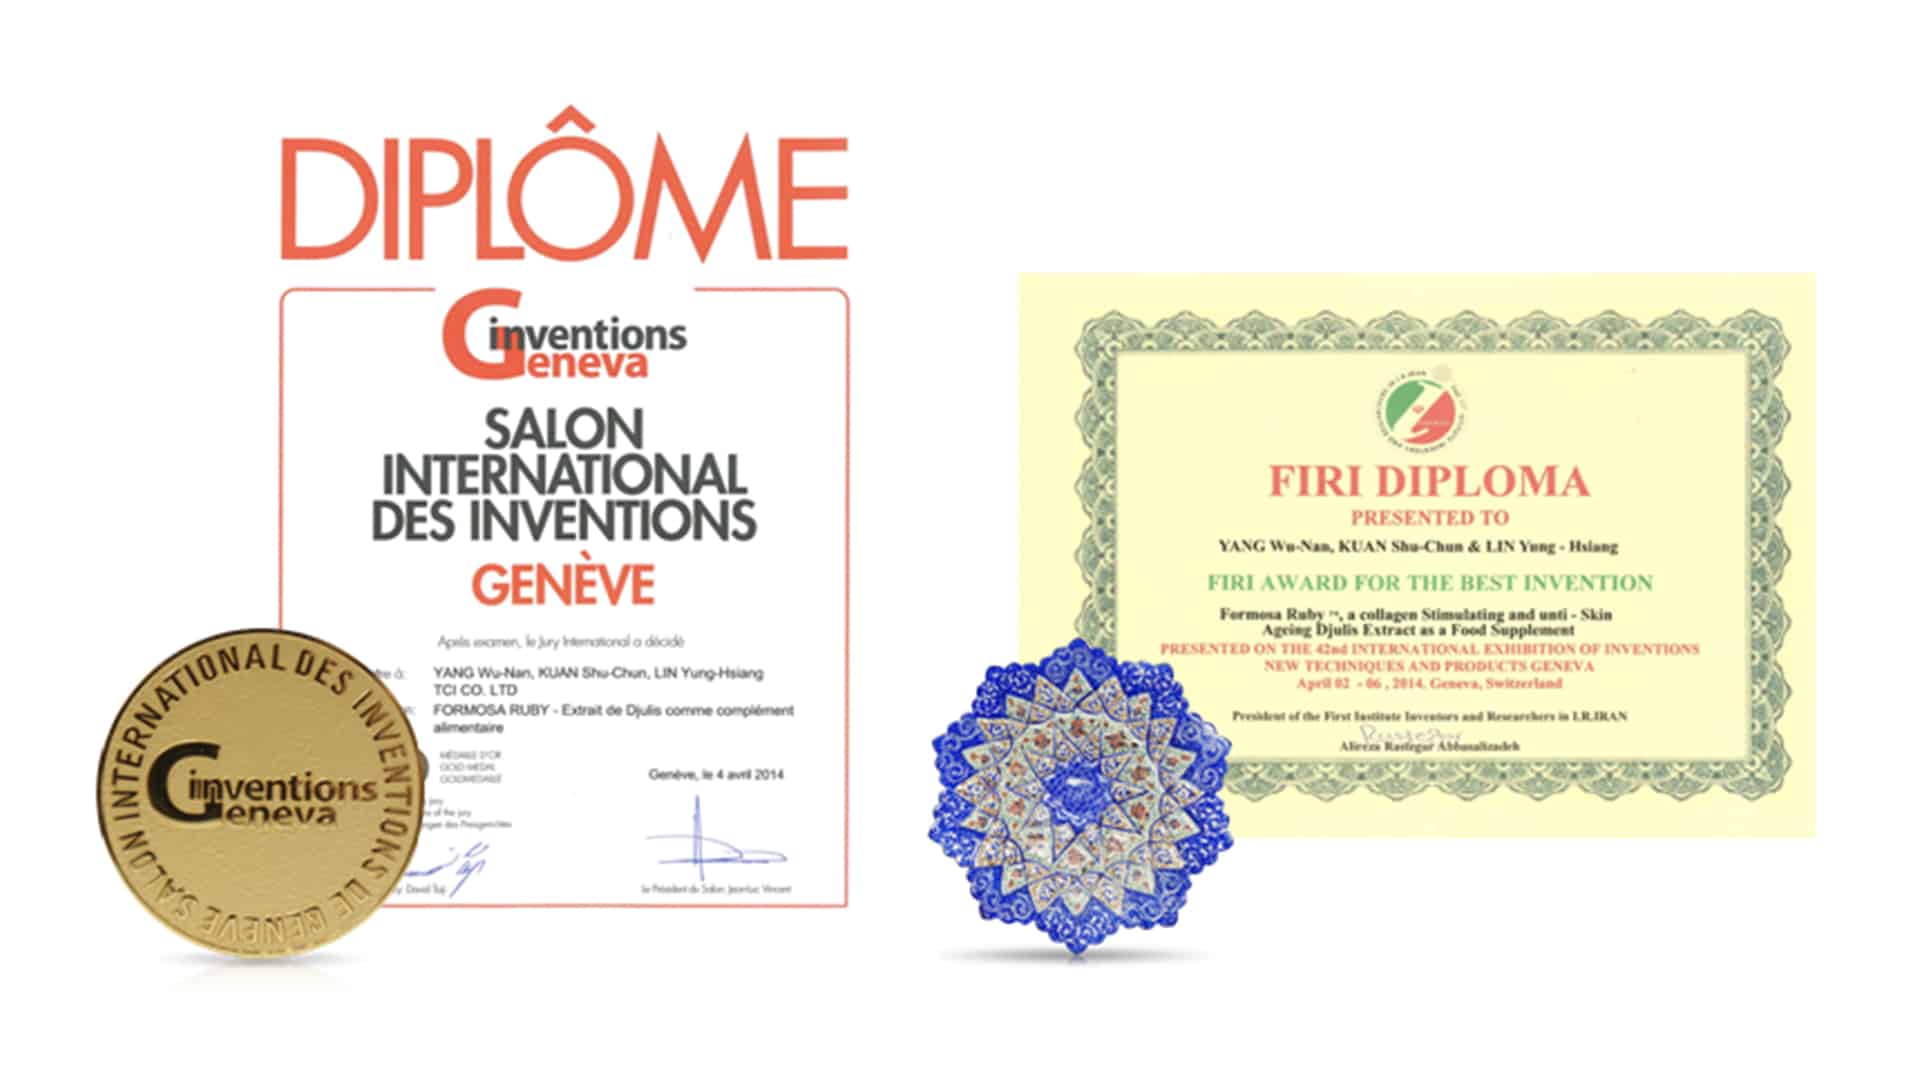 Gold medal and Special award at the 2014 Geneva International Exhibition of Inventions: Chenopodium formosanum extract promotes collagen proliferation and anti-glycation